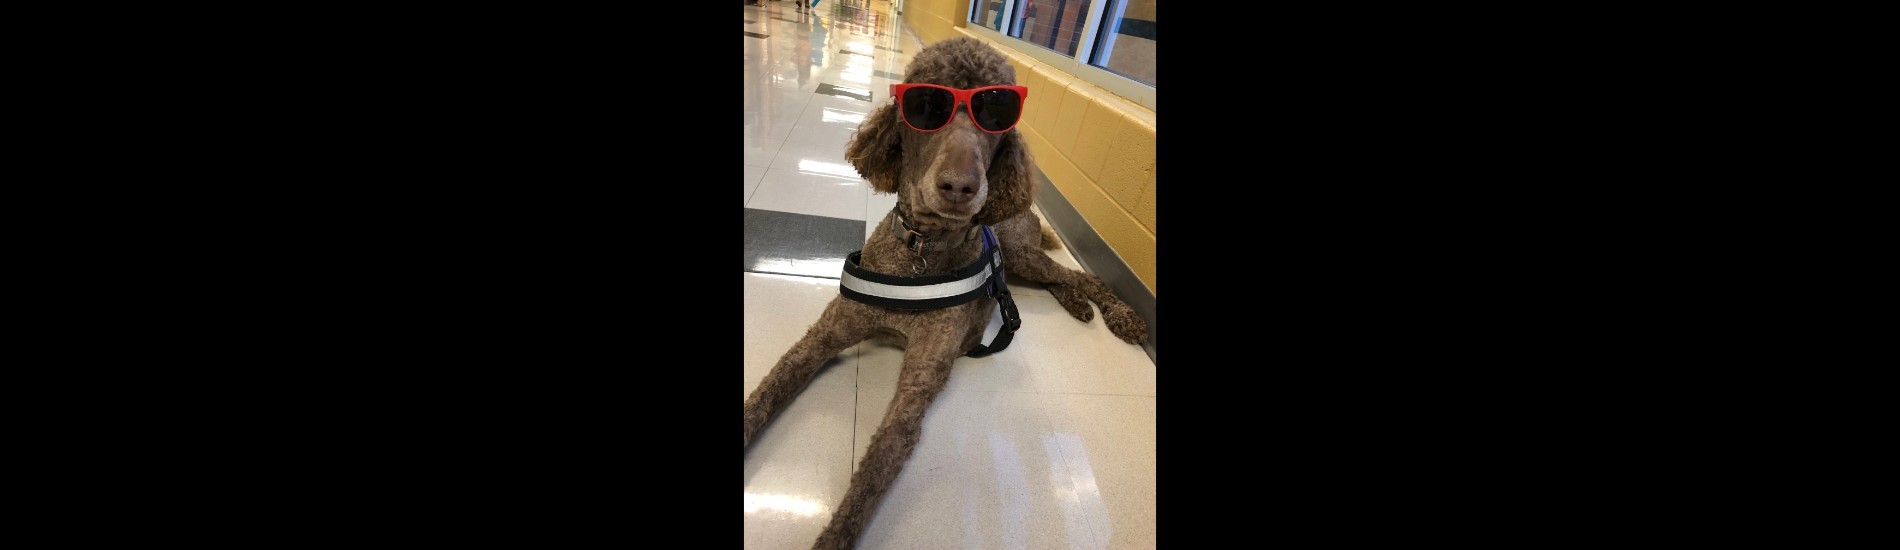 therapy dog wearing sunglasses